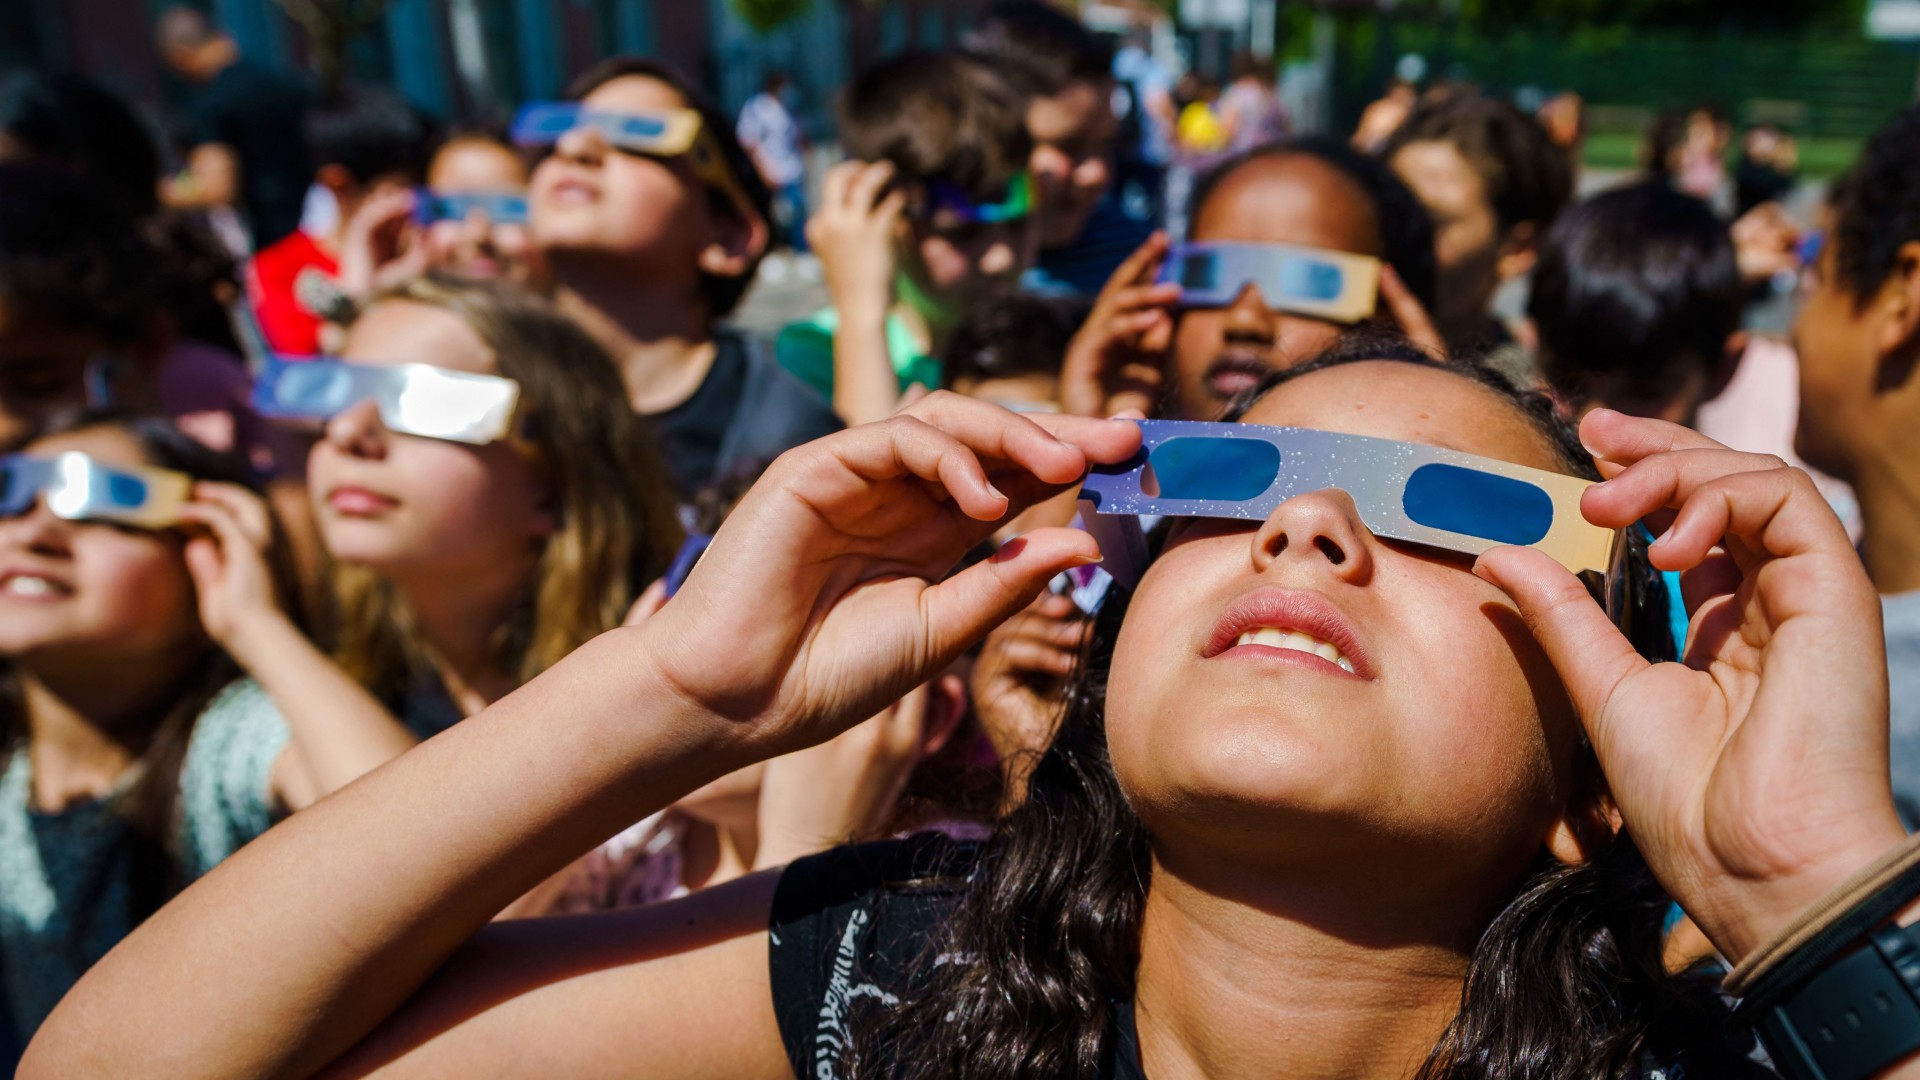 Children wearing solar eclipse glasses look at the sun